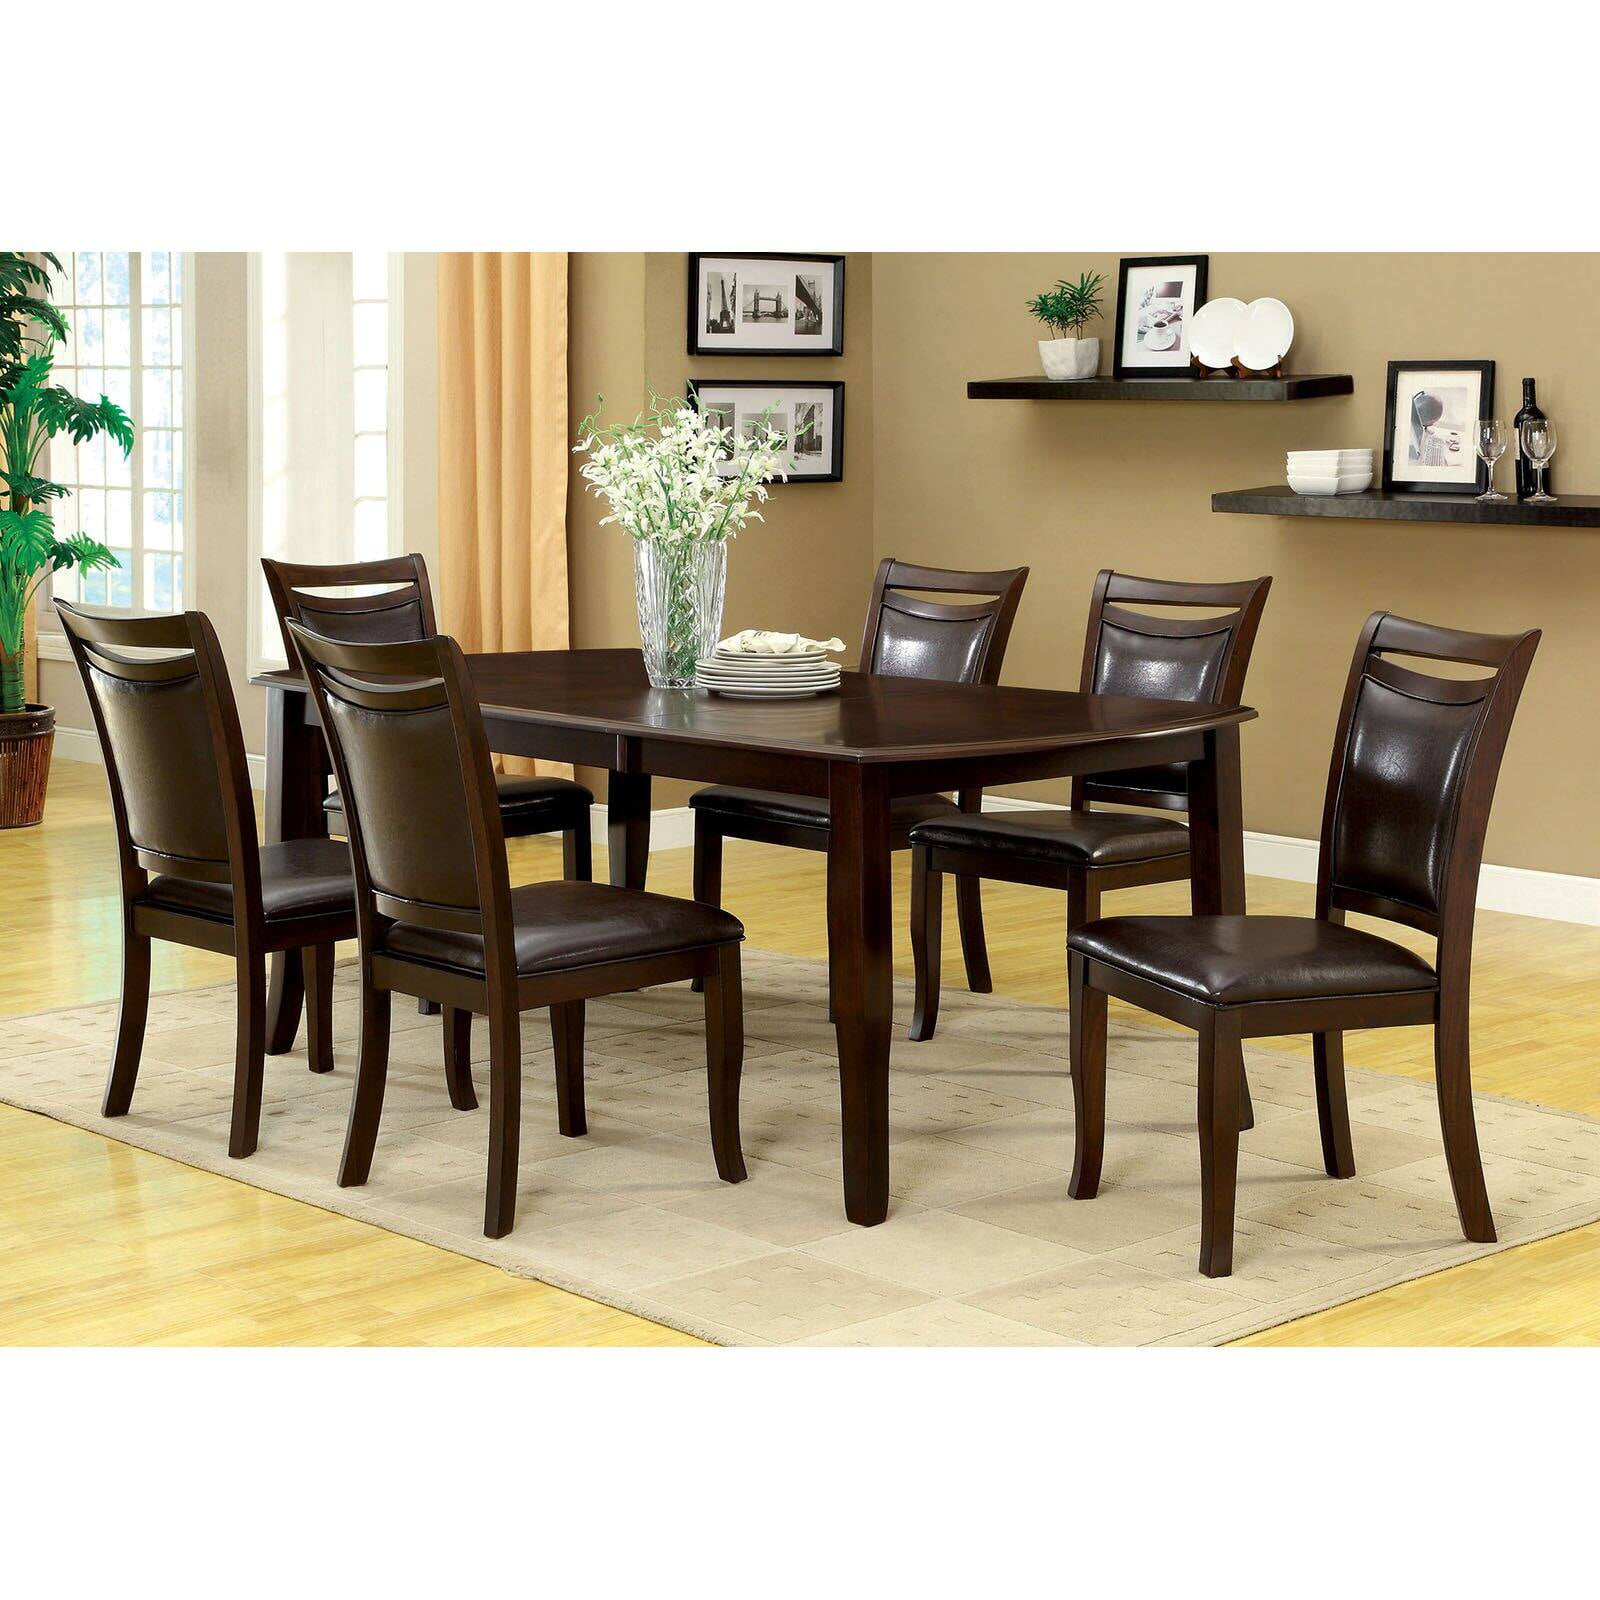 7 Piece Dining Table Set, 7 Pc Dining Room Table Sets